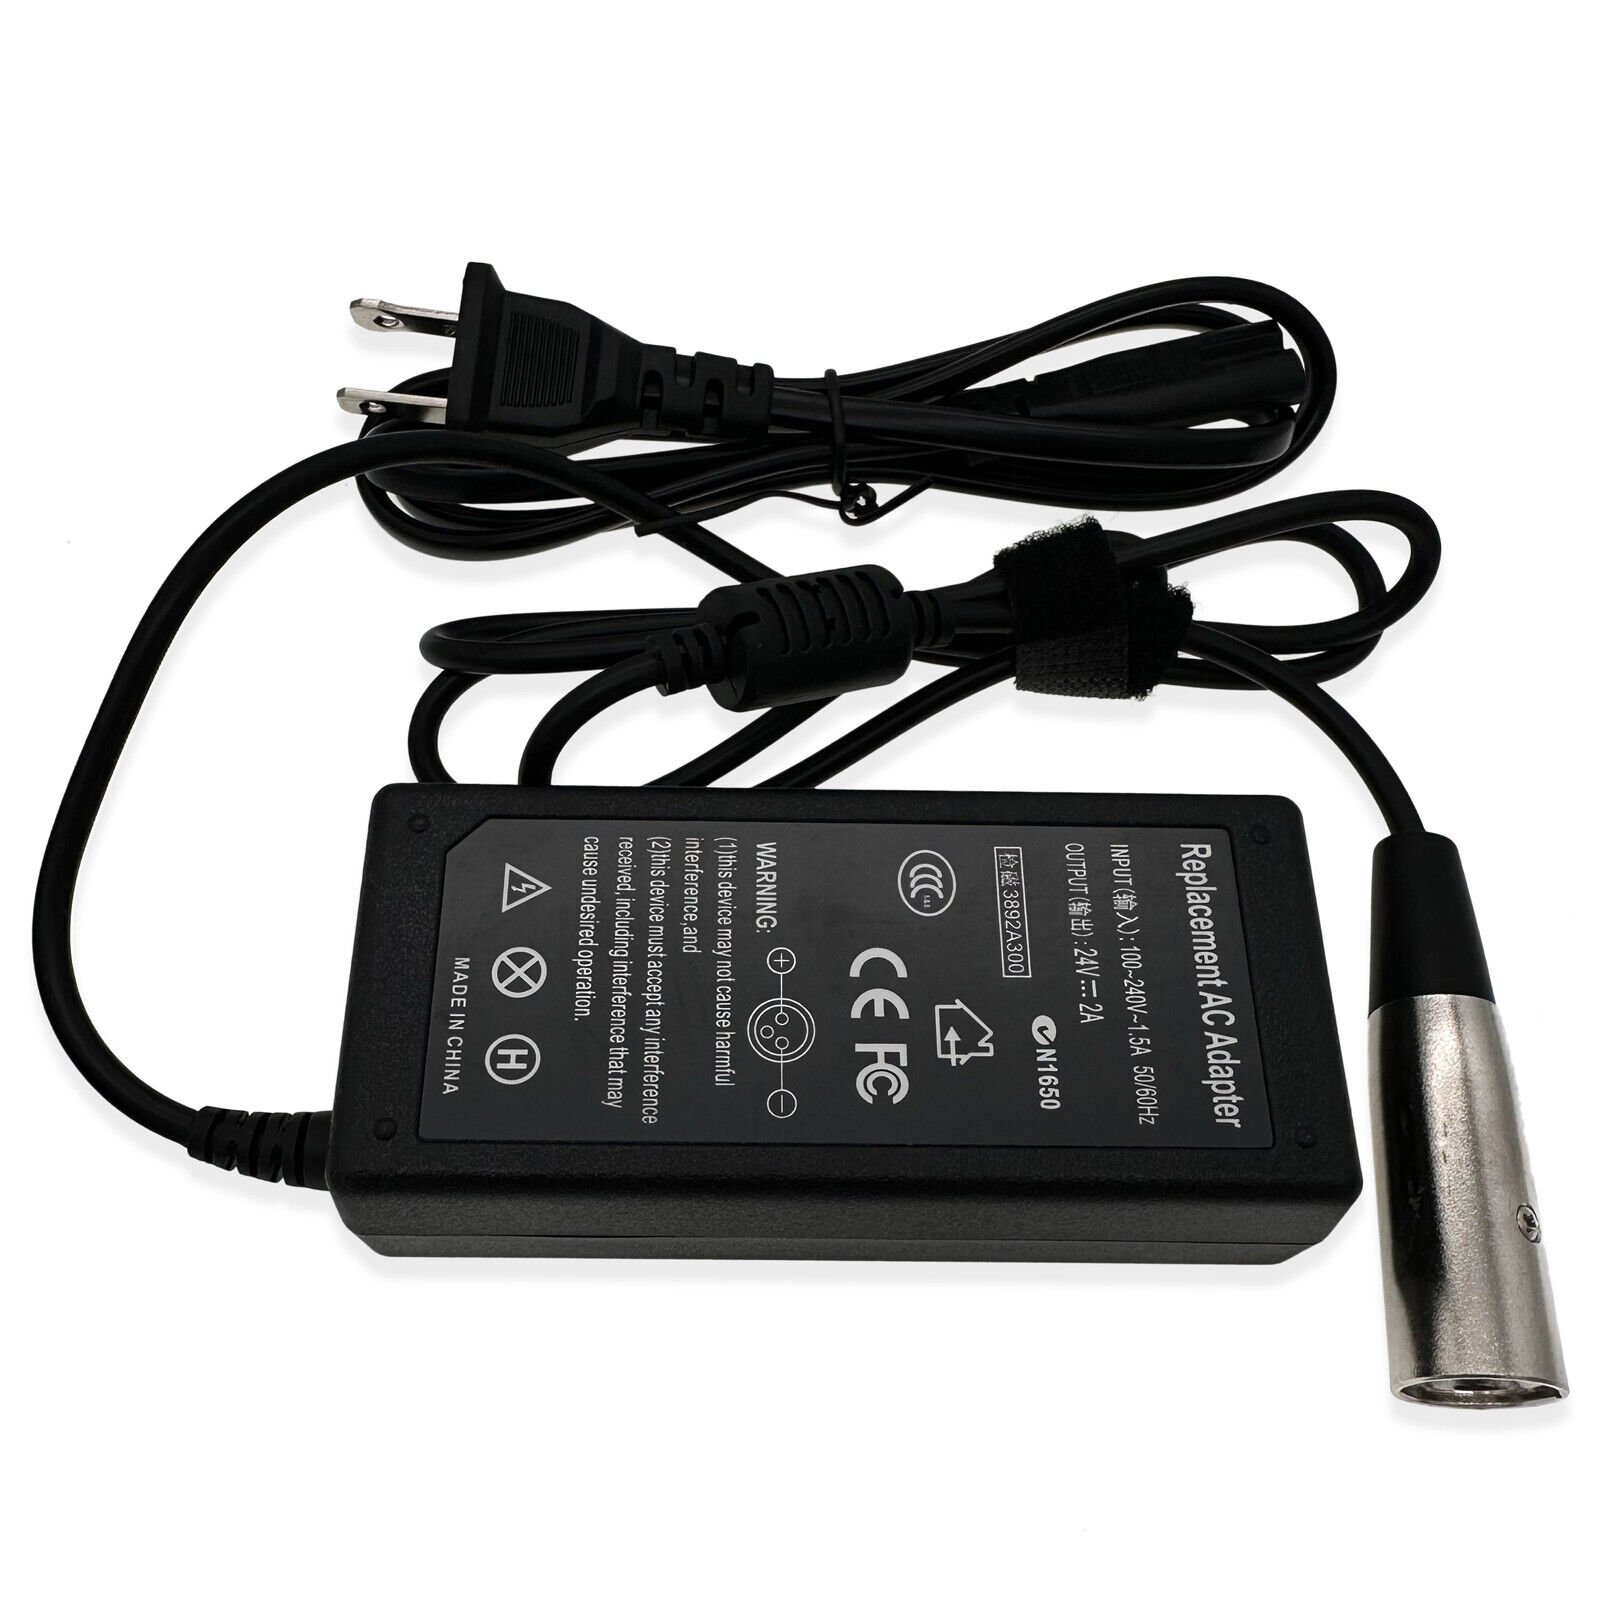 24V 2A Scooter Battery Charger For Currie e-ride ,PHAT FLYER SE, PHAT PHANTOM 24V 2A Scooter Battery Charger For Currie